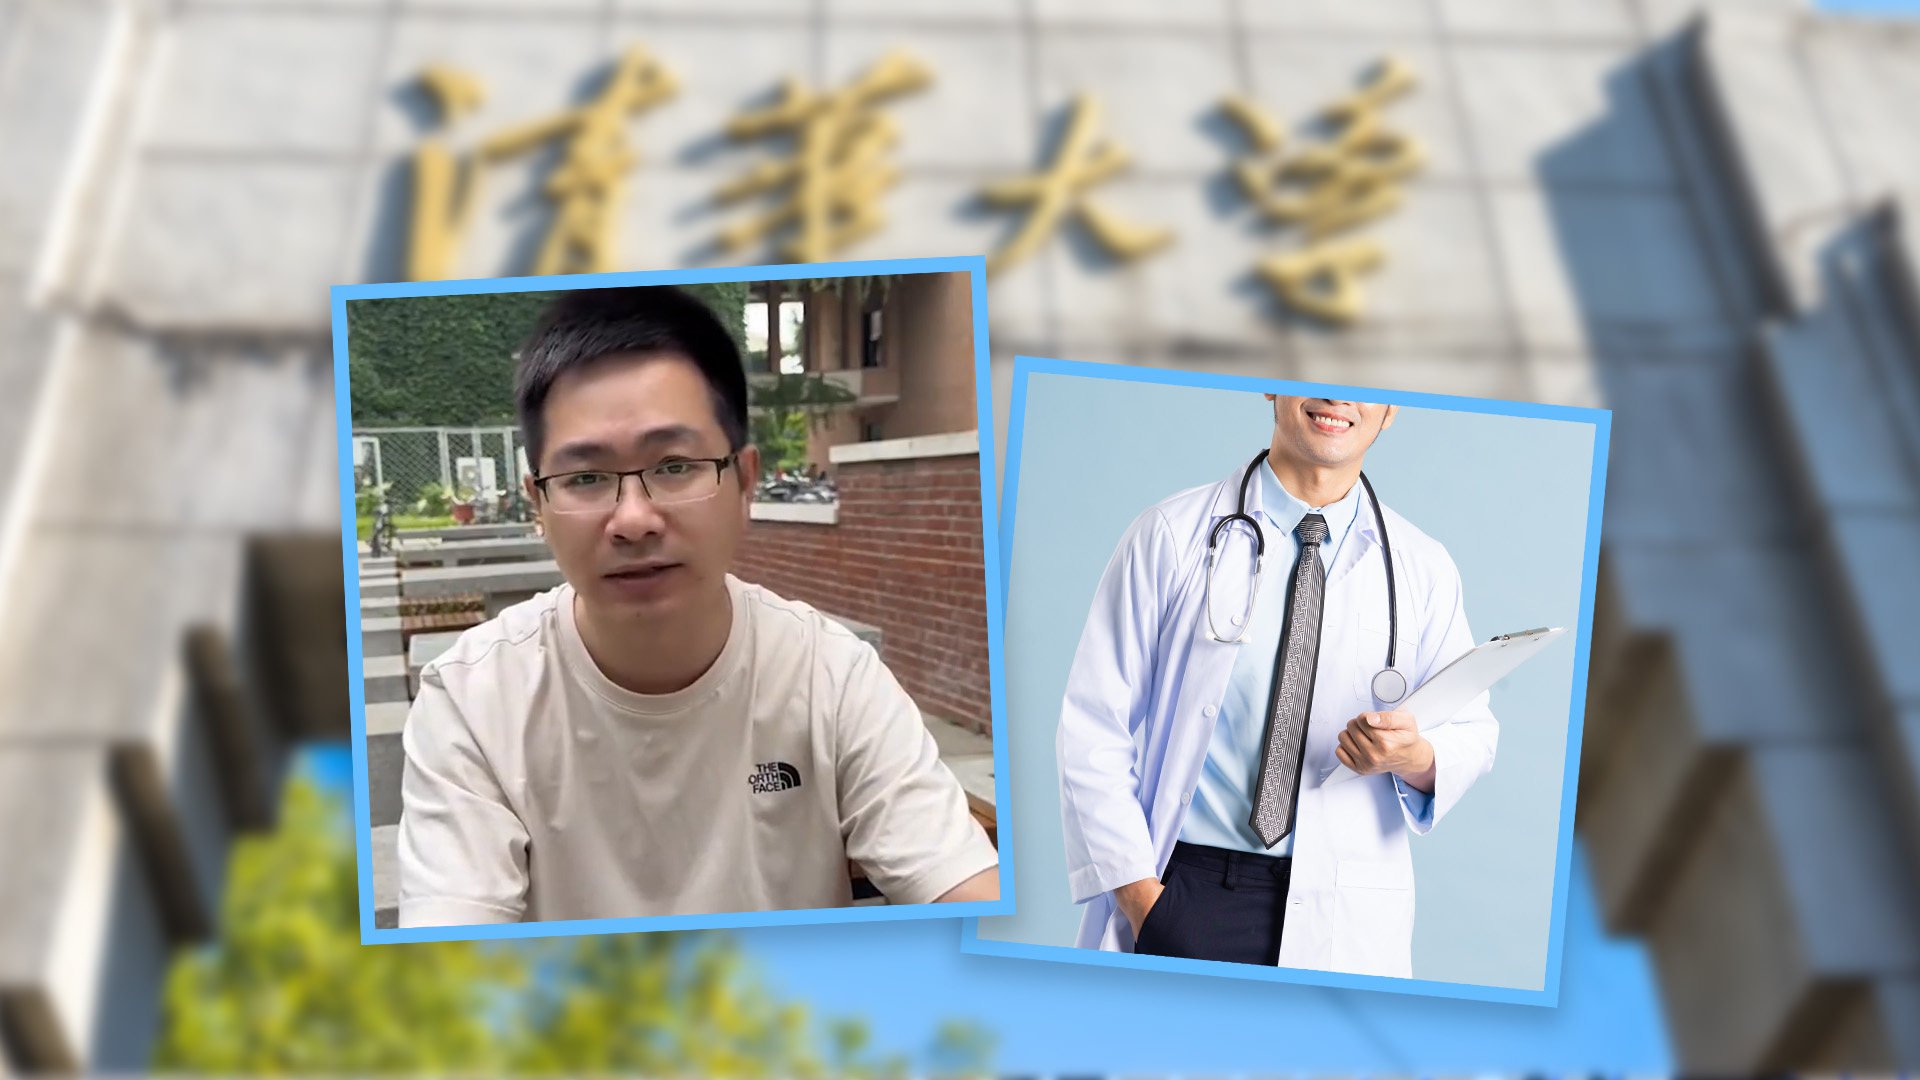 A older man who teaches at a top university in China has been slammed for re-taking a key national exam so he can pursue his dream of studying medicine. Photo: SCMP composite/Shutterstock/Weibo